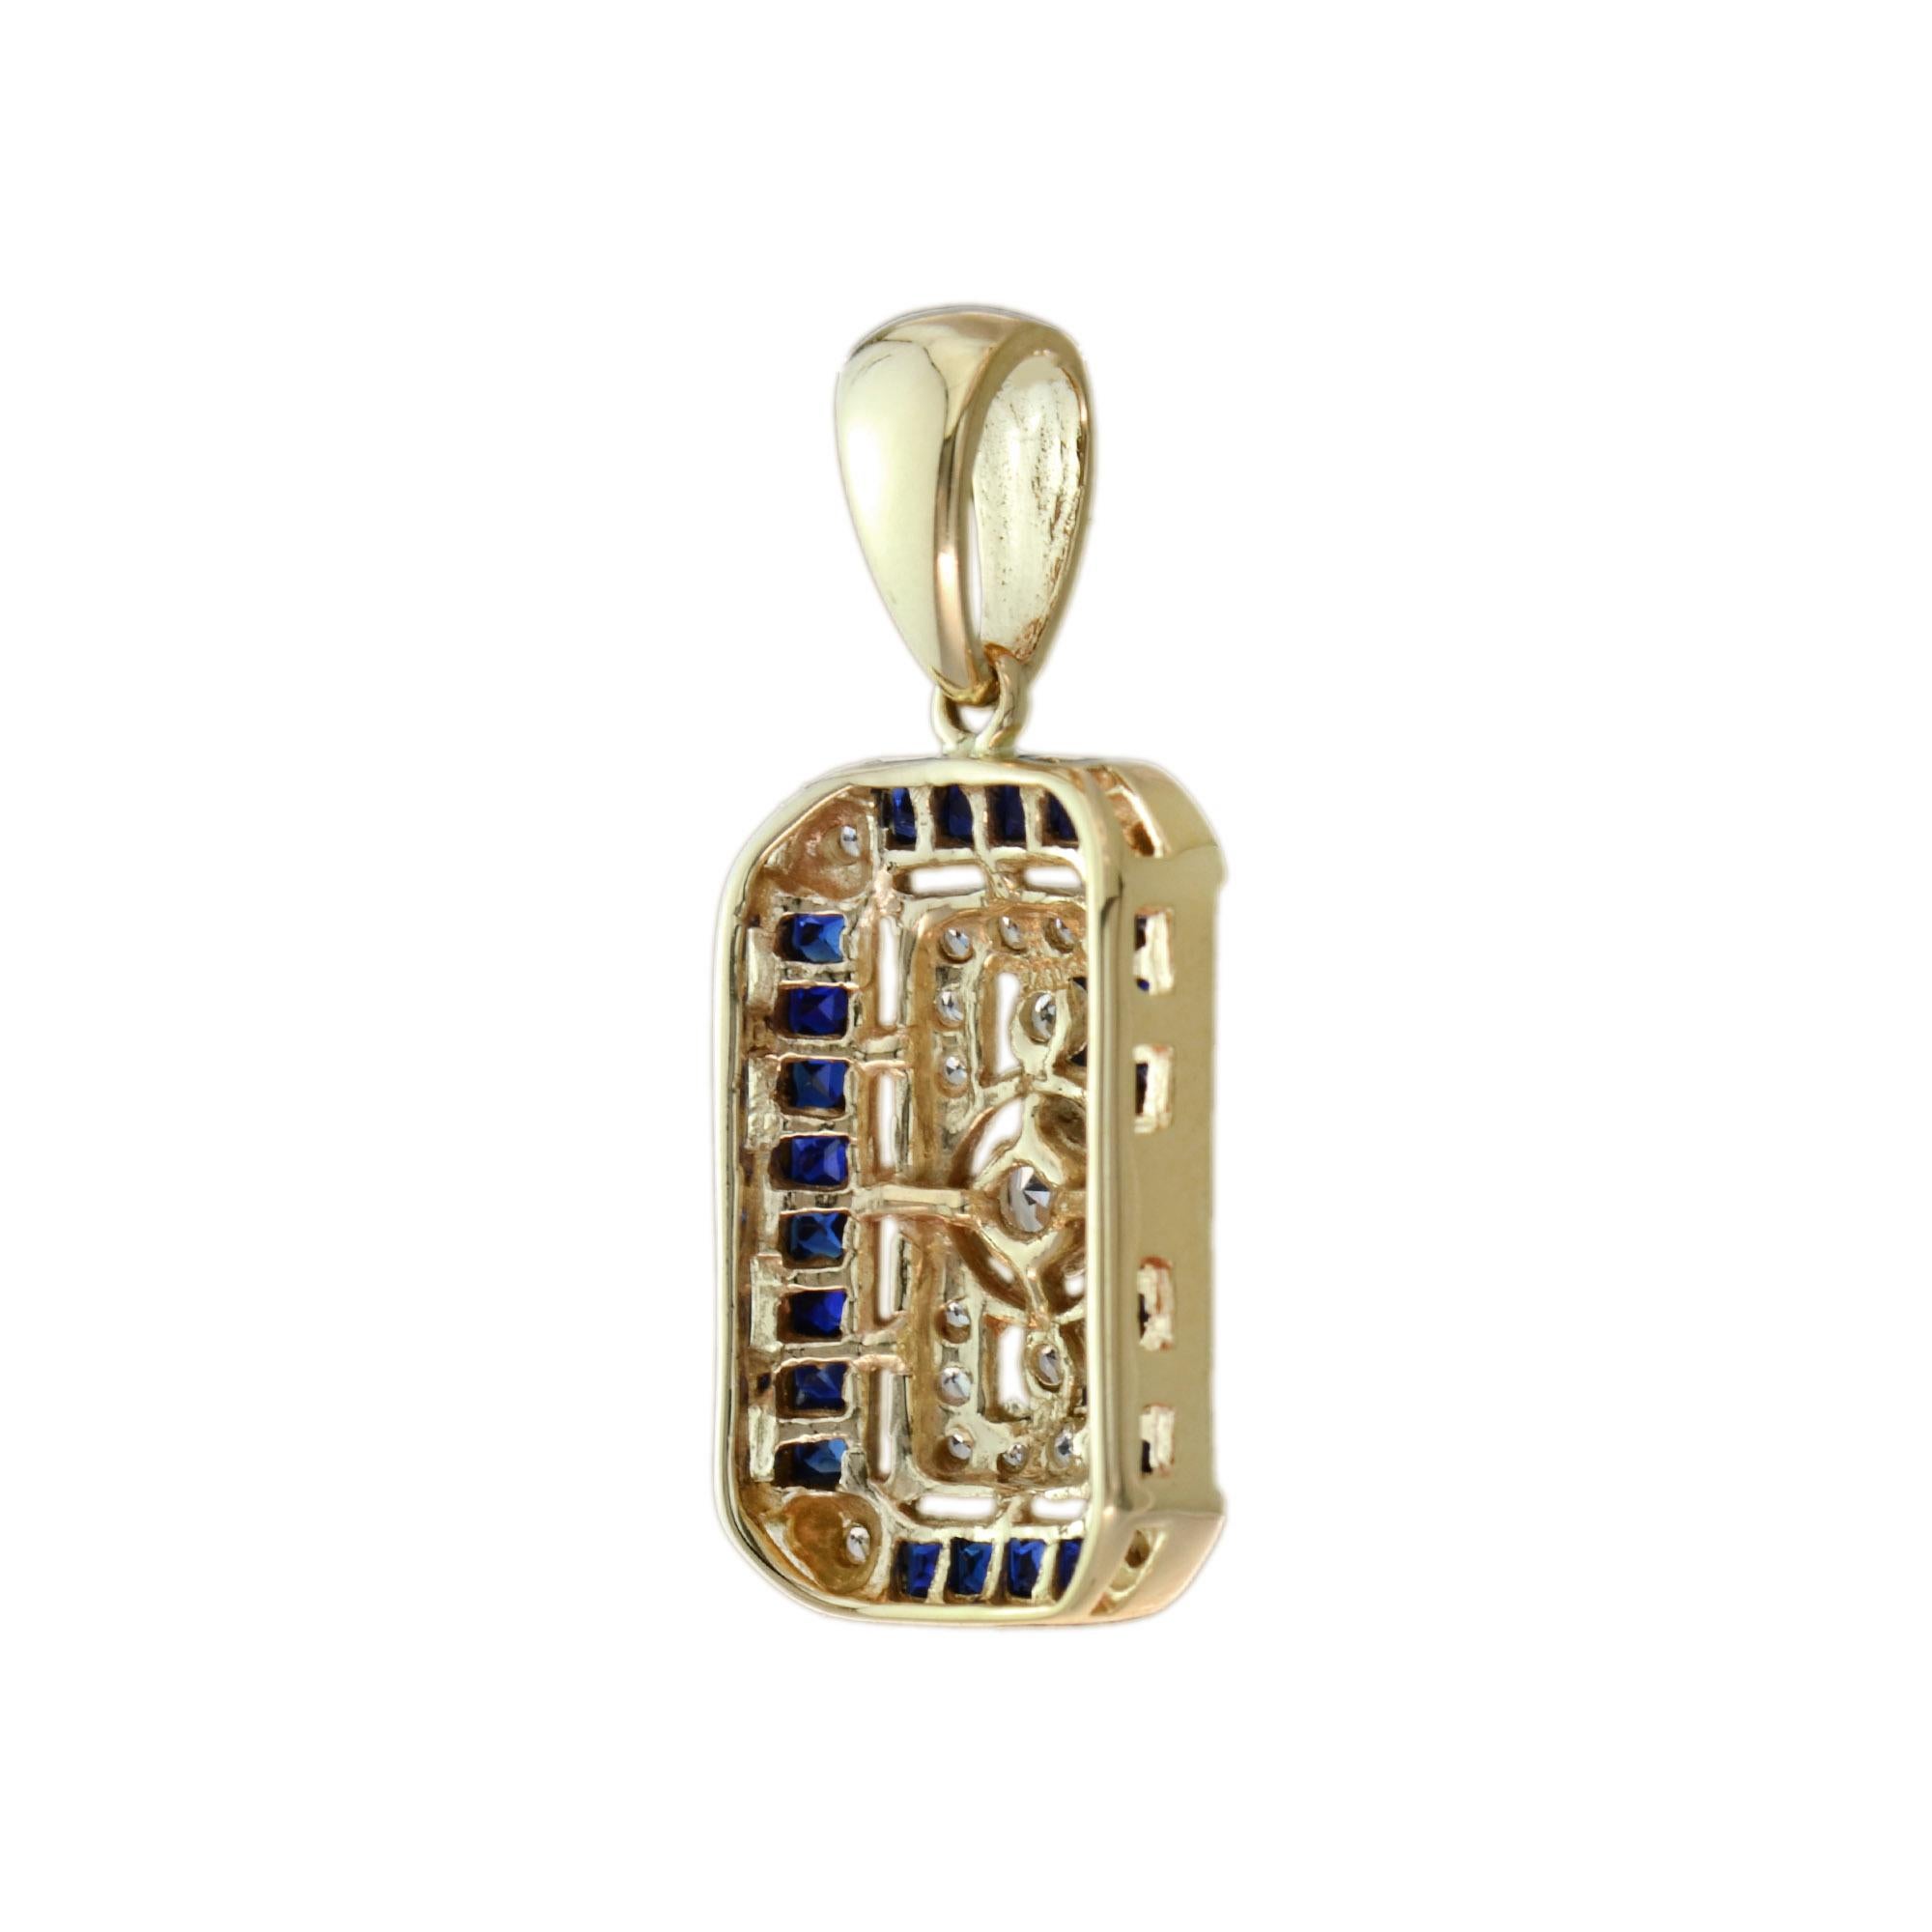 Taille ronde Old Cut Diamond and Sapphire Antique Style Filigree Pendant in 14K Yellow Gold en vente